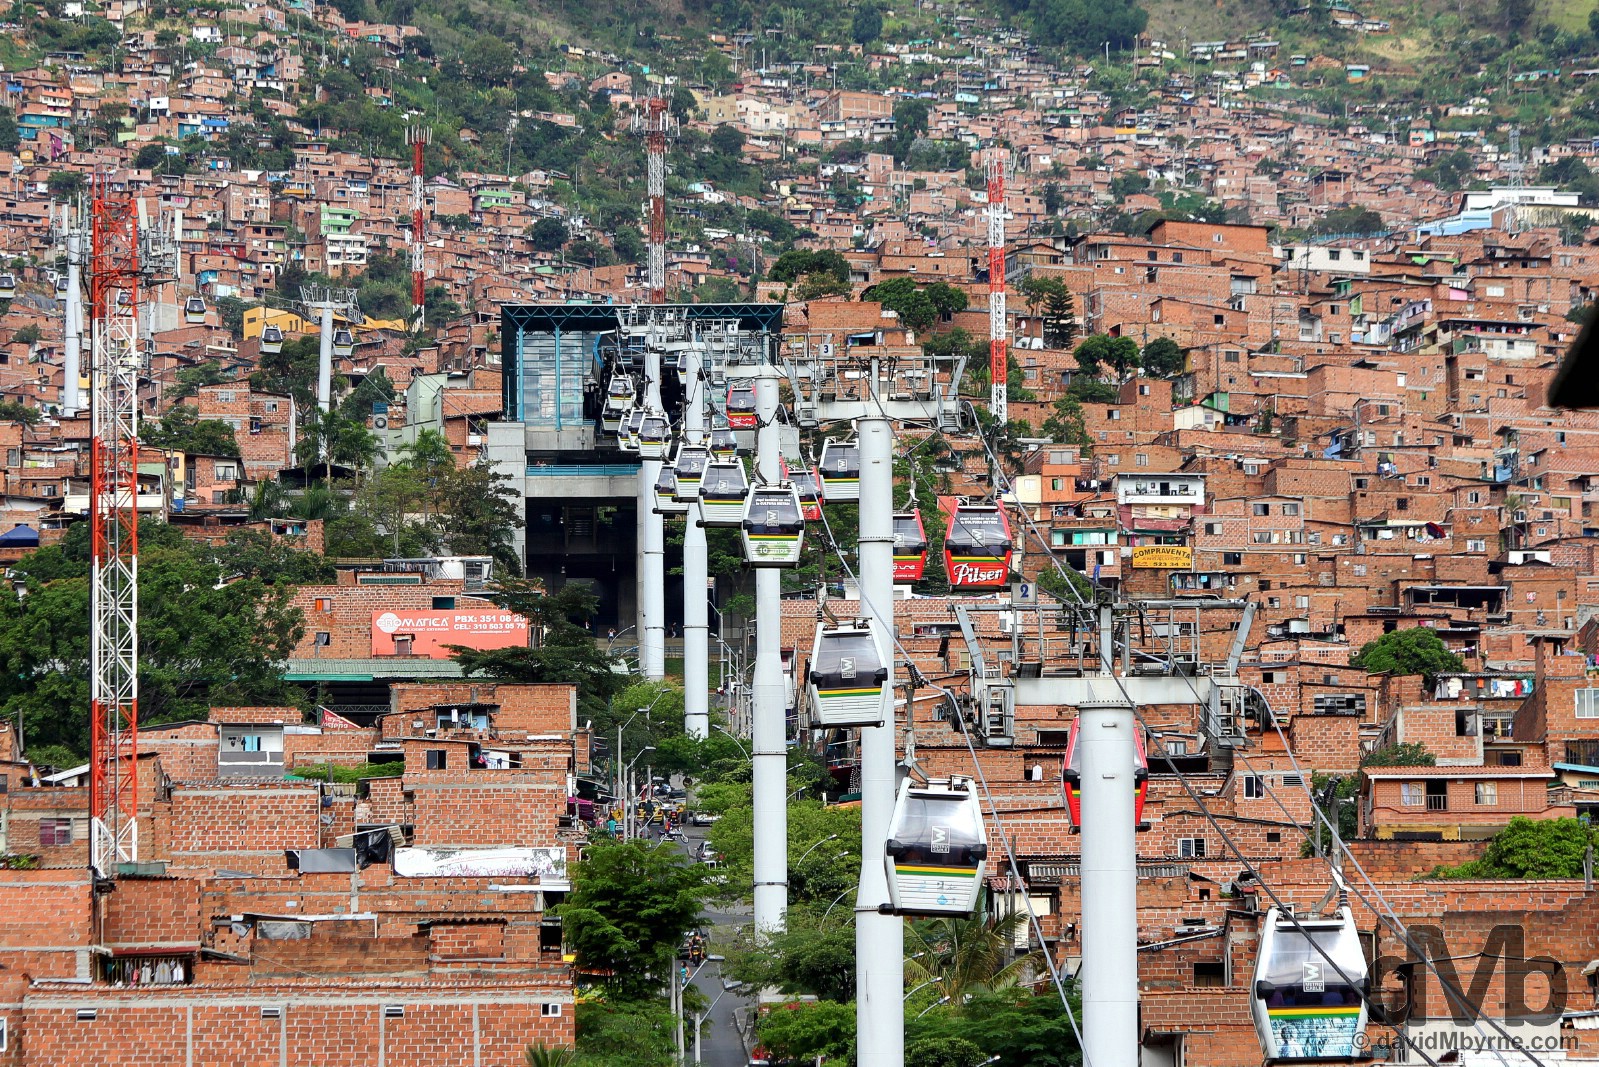 A section of the Metrocable & distinctive redbrick hillside buildings in Medellin, Colombia. June 27, 2015.